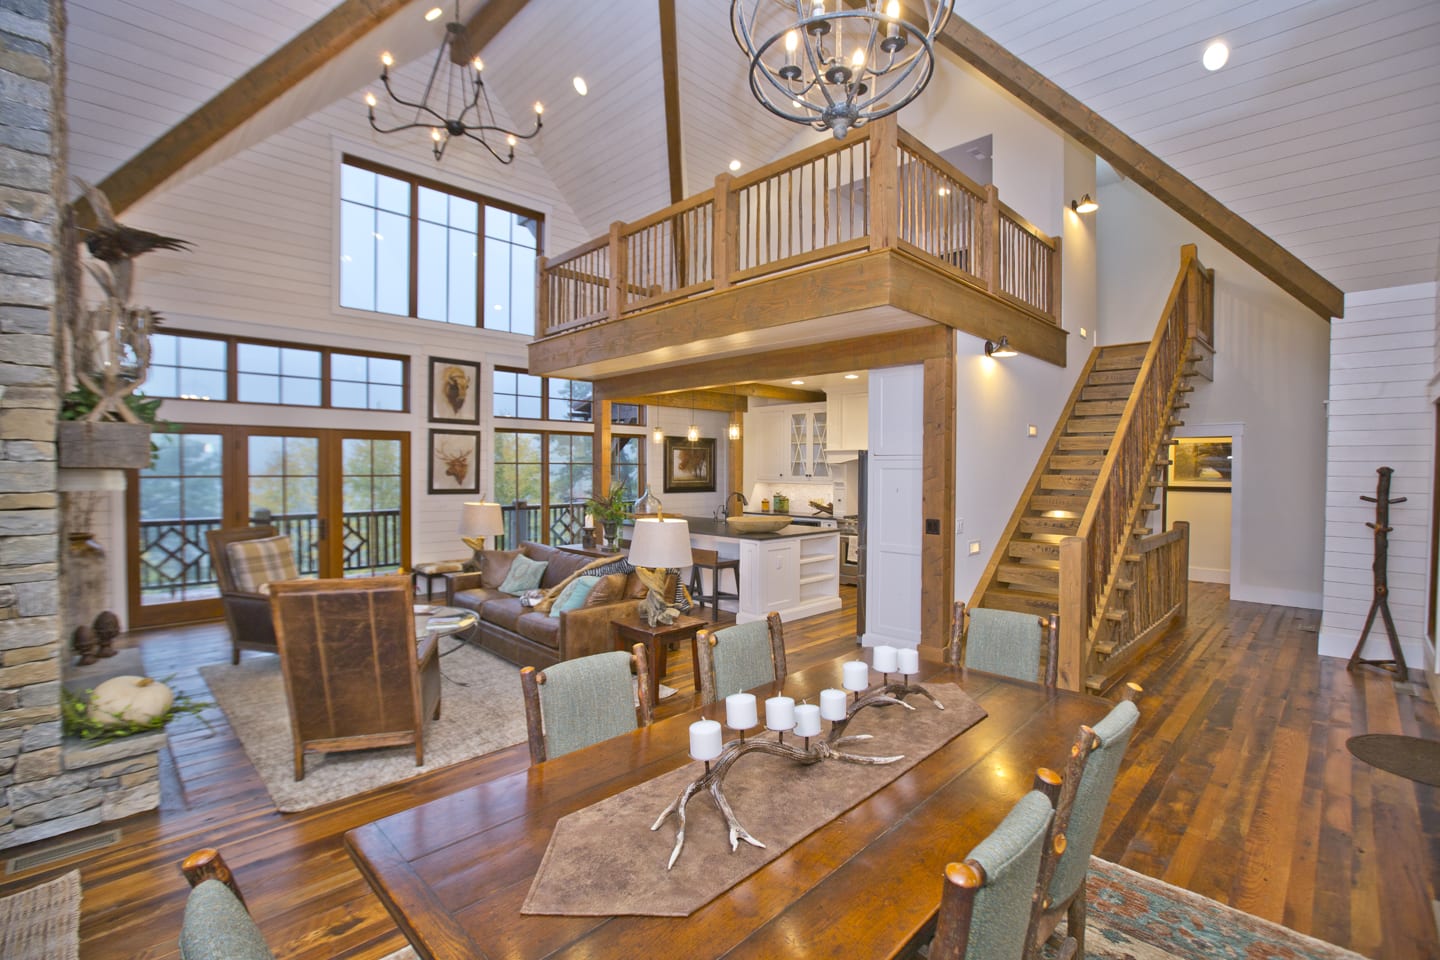 How To Find a Mountain Home Builder